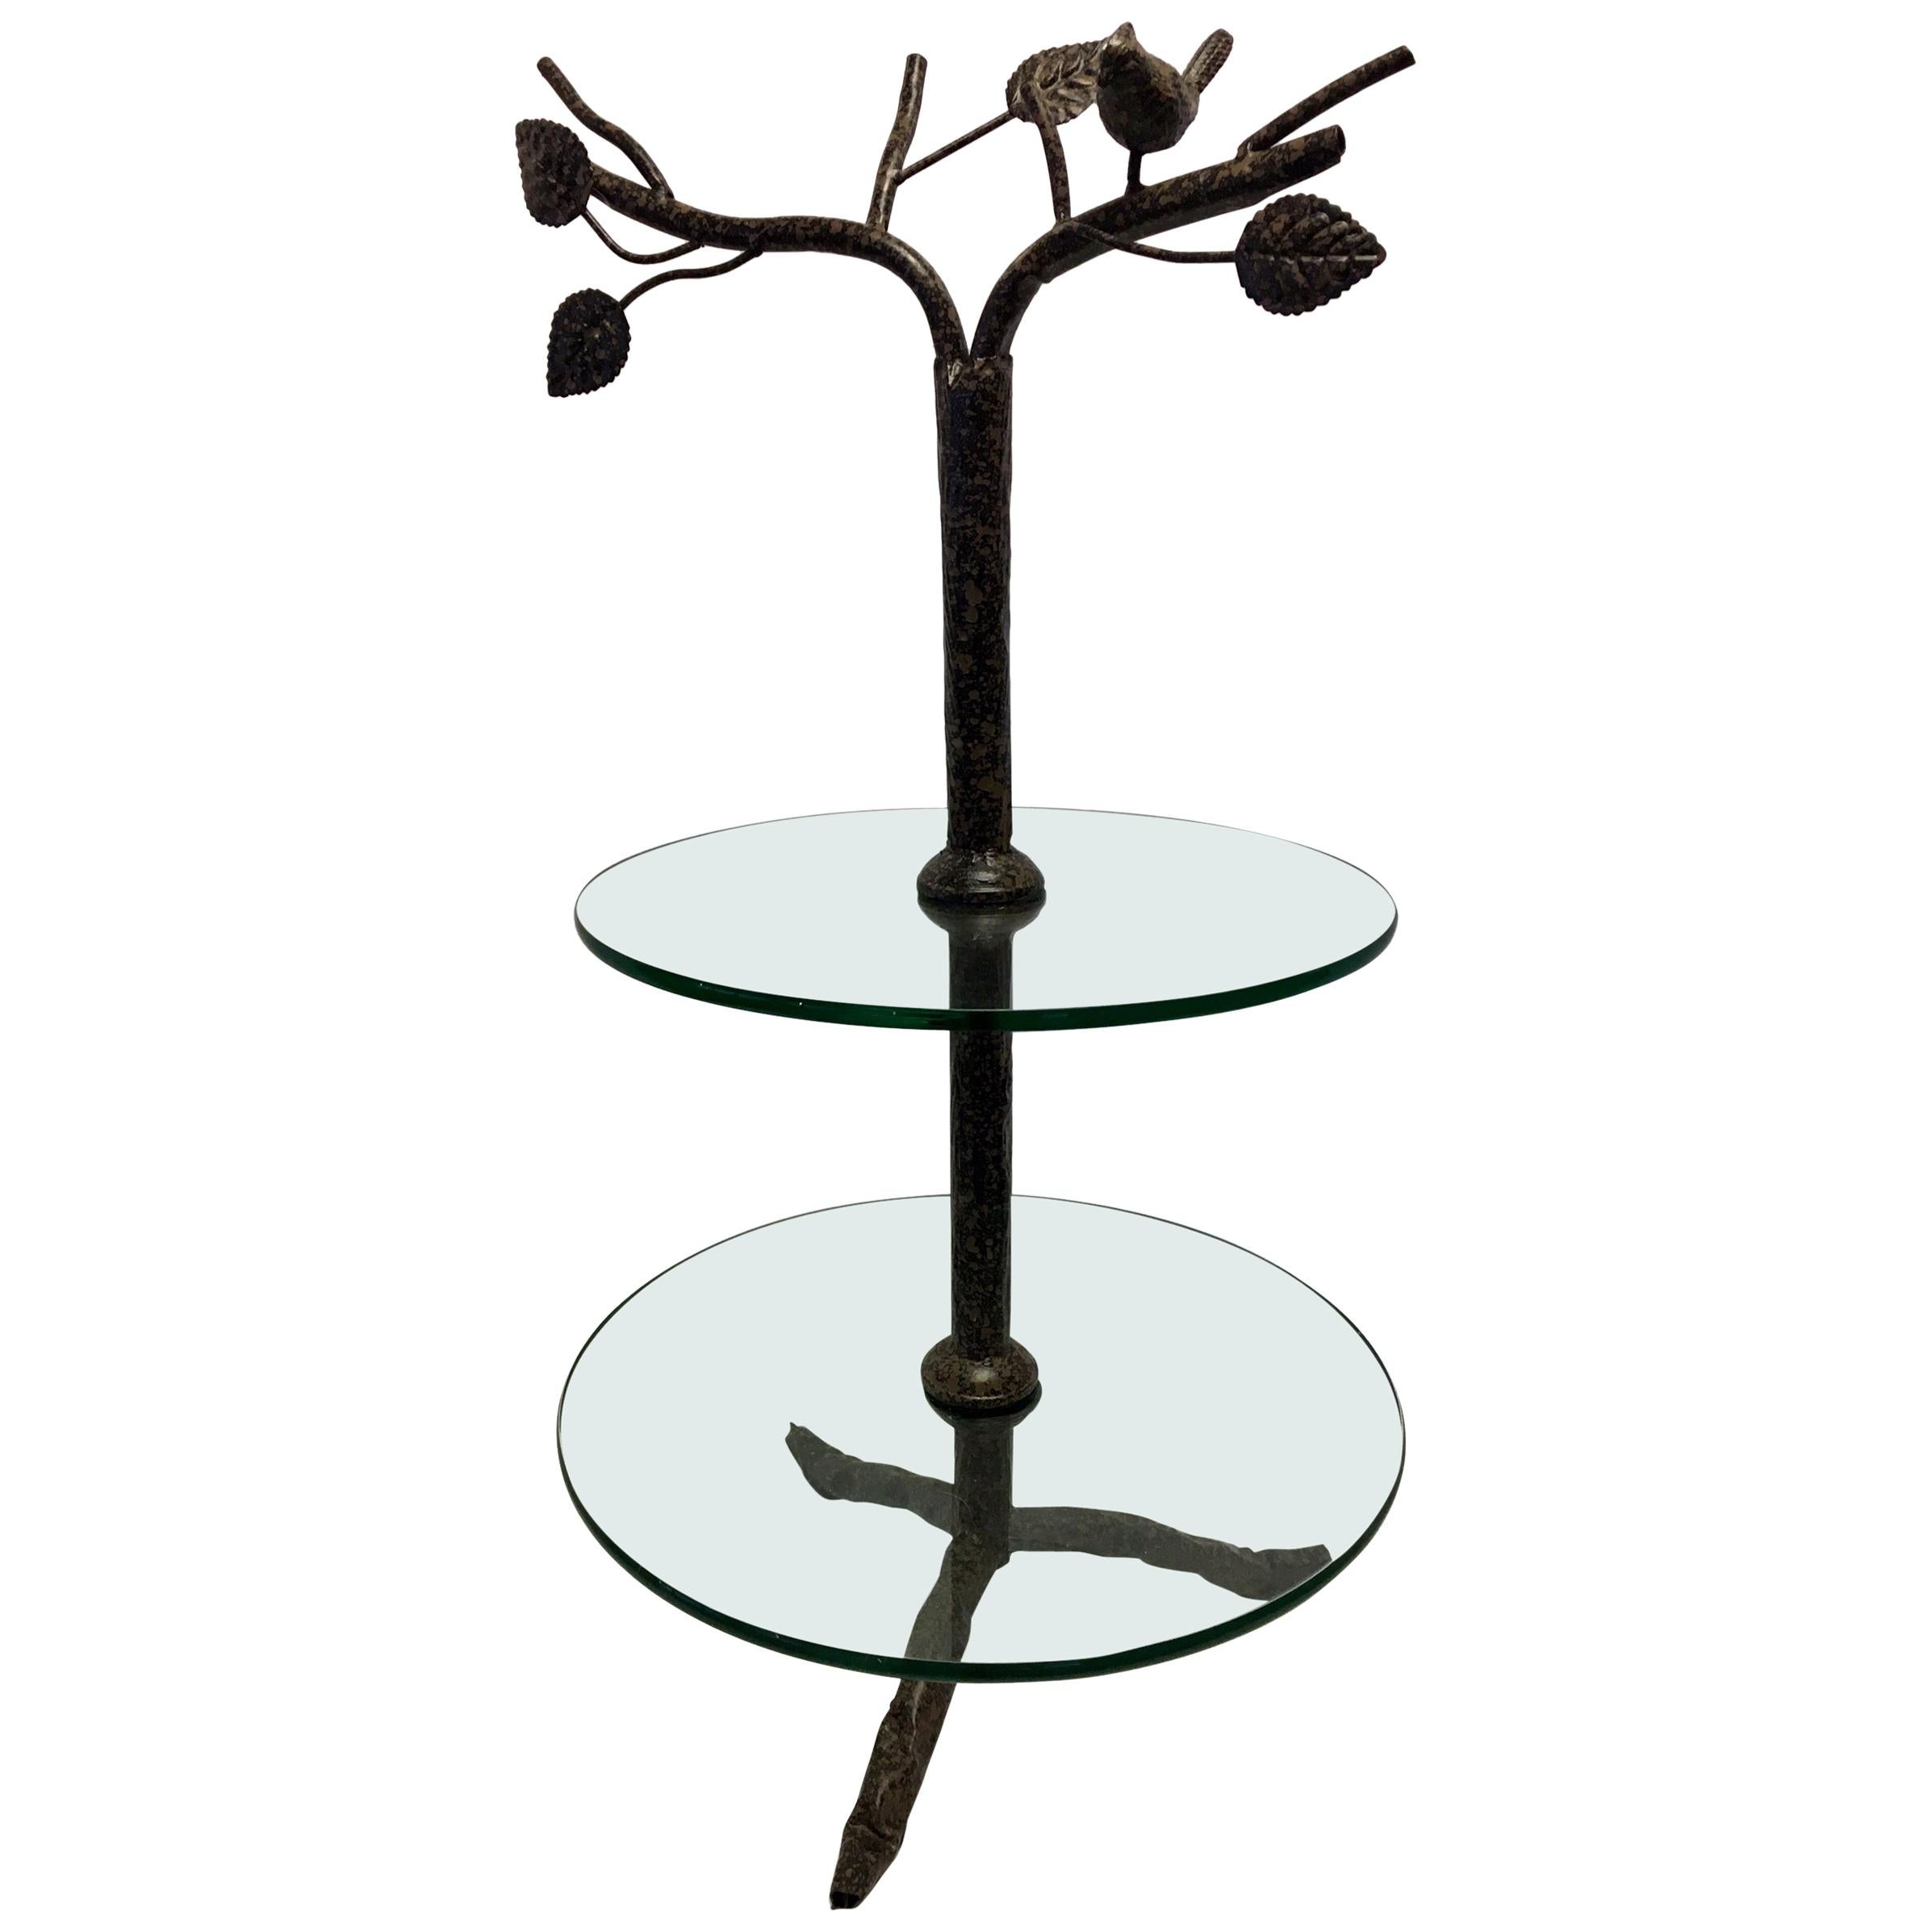 Modern Art Deco Metal Tree Round Two-Tiered Glass Side Table